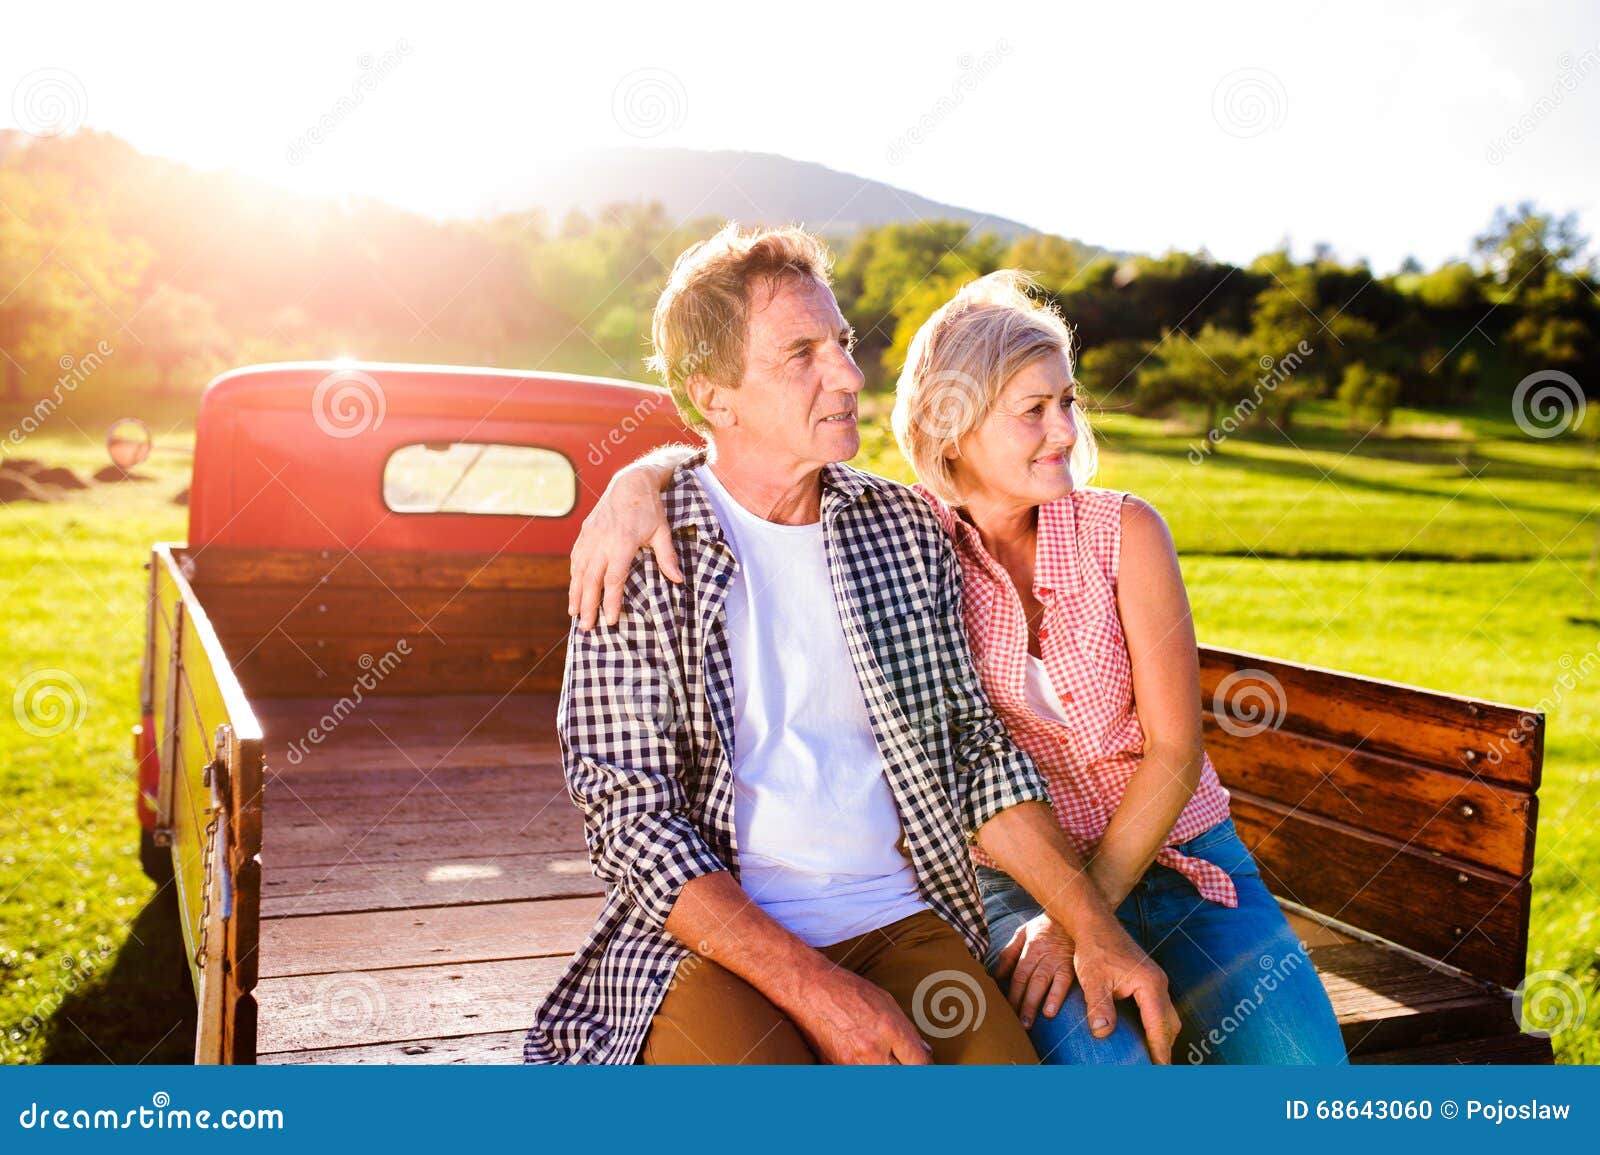 Senior Couple Sitting in Back of Red Pickup Truck Stock Photo - Image ...